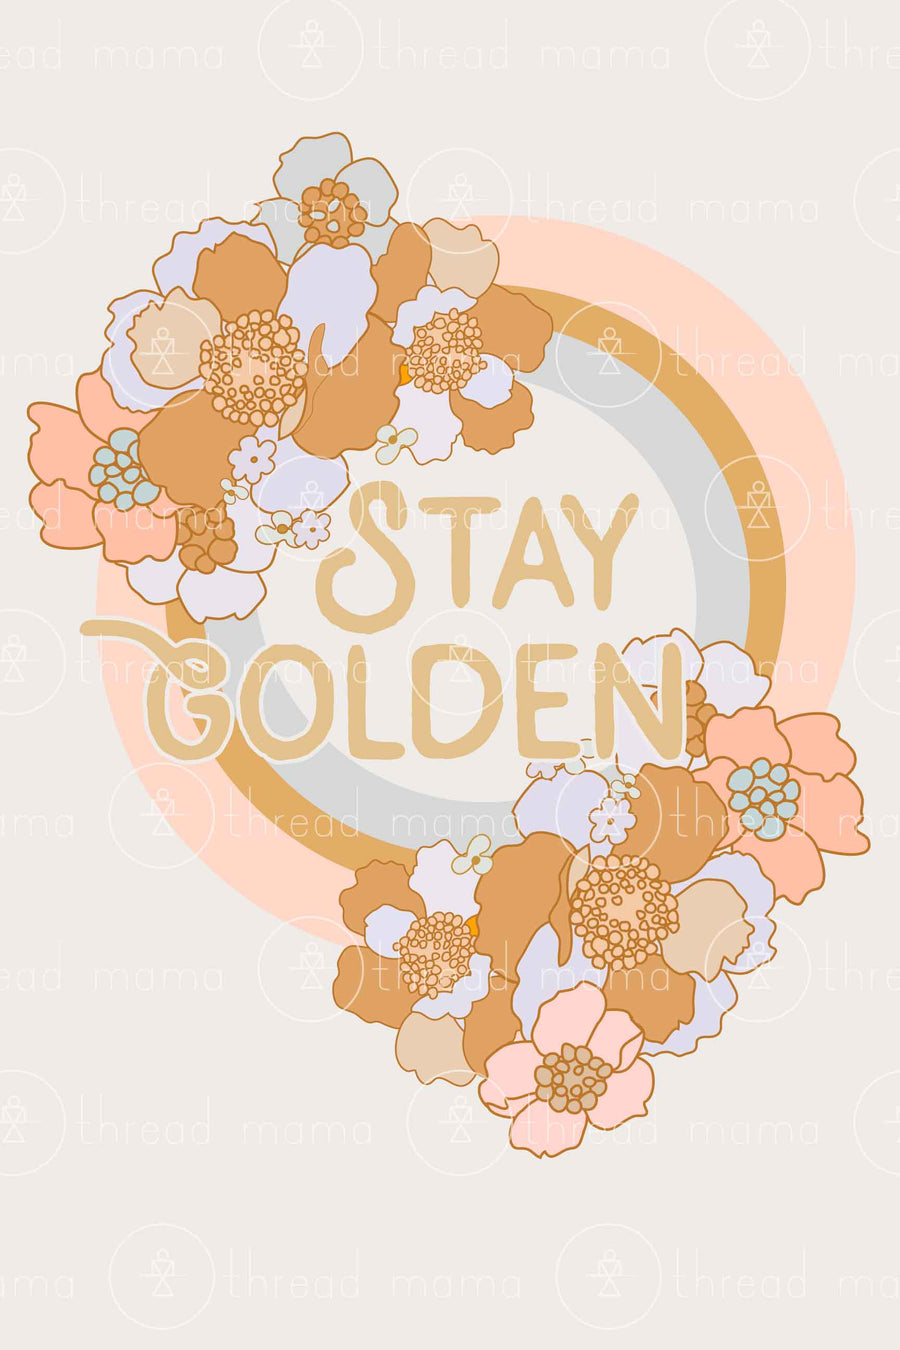 Stay Golden - 2 colors included (Printable Poster)